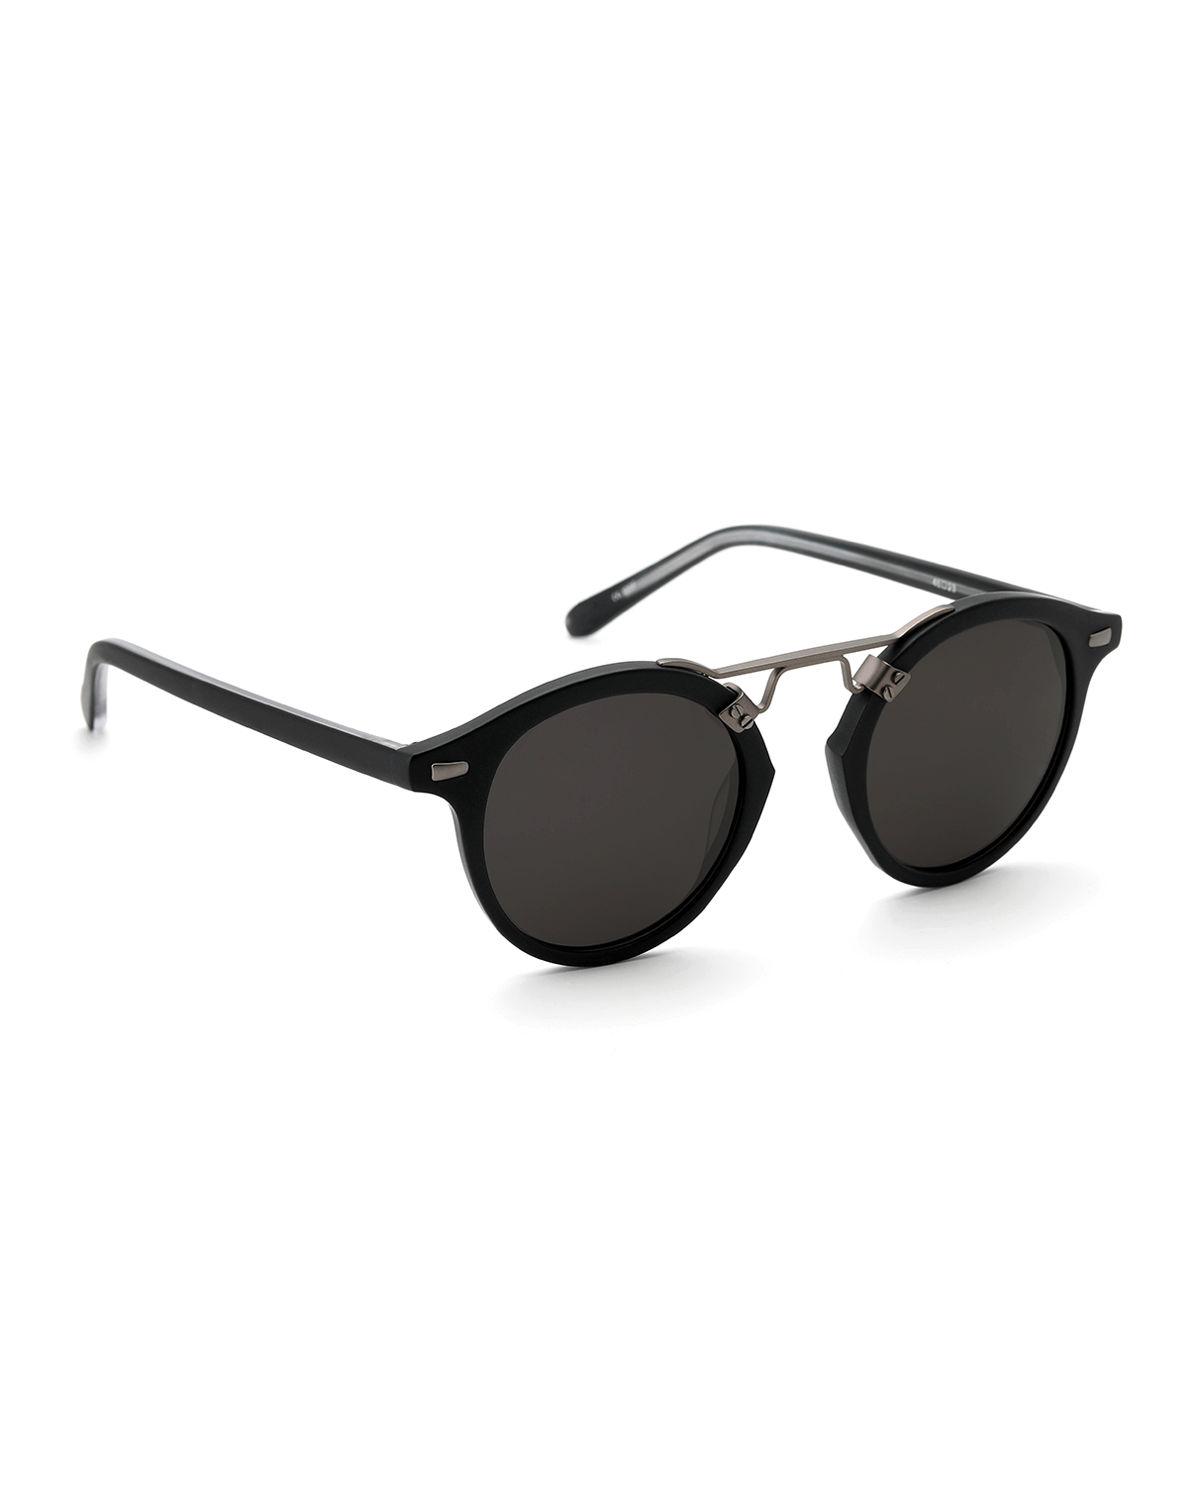 Lyst - Krewe St. Louis Round Two-tone Sunglasses in Black